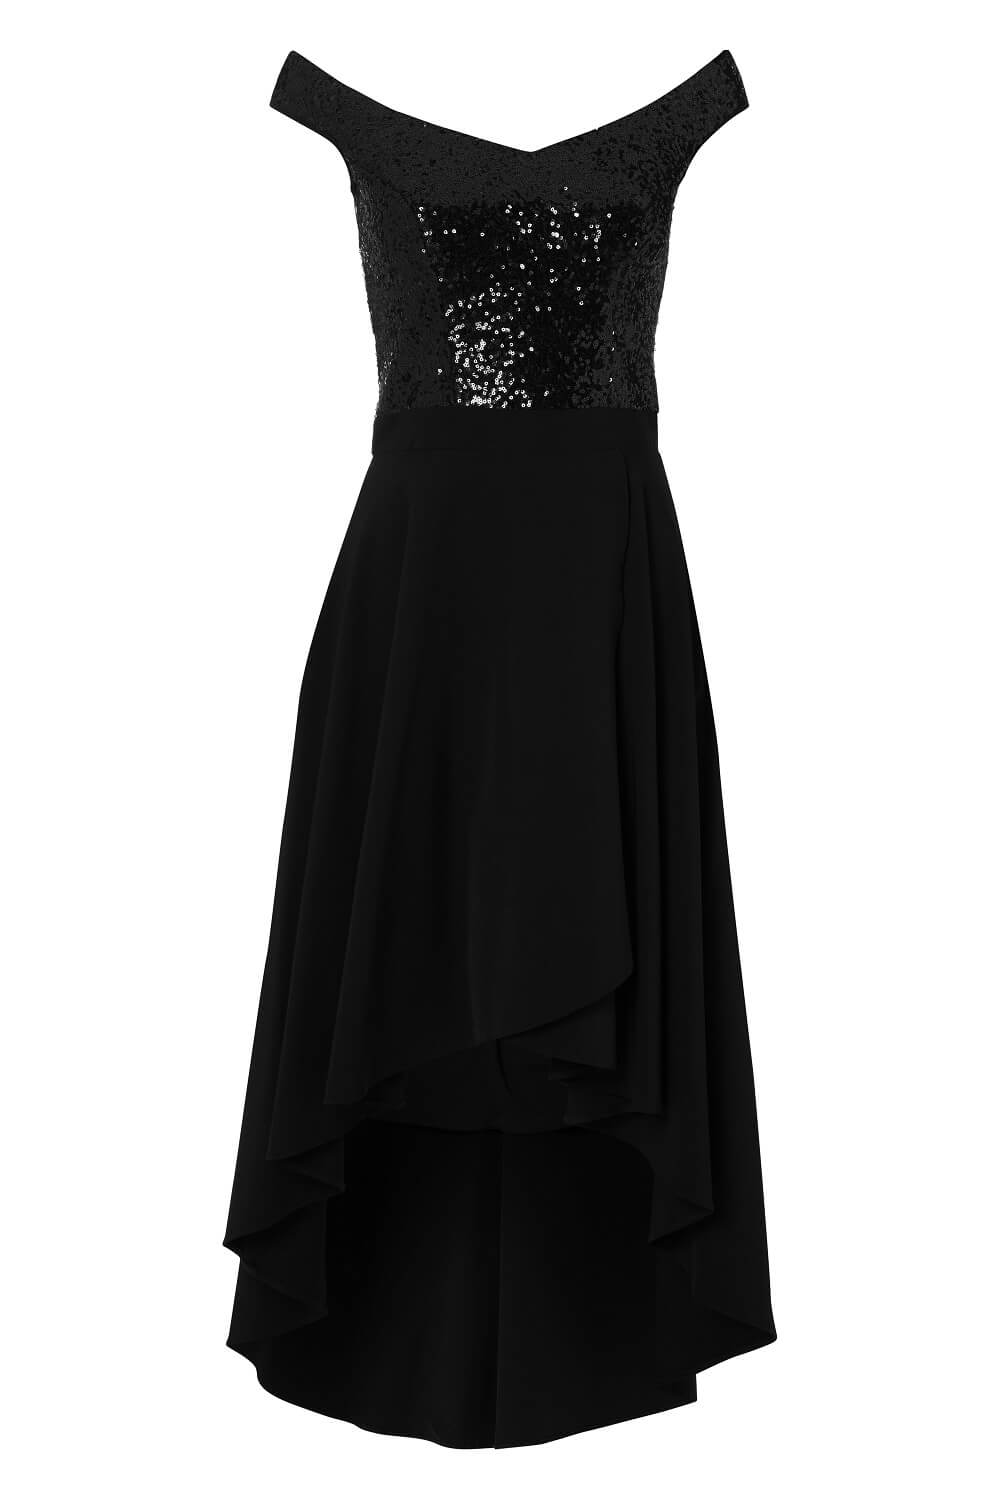 Black Sequin Bardot Gown, Image 4 of 4